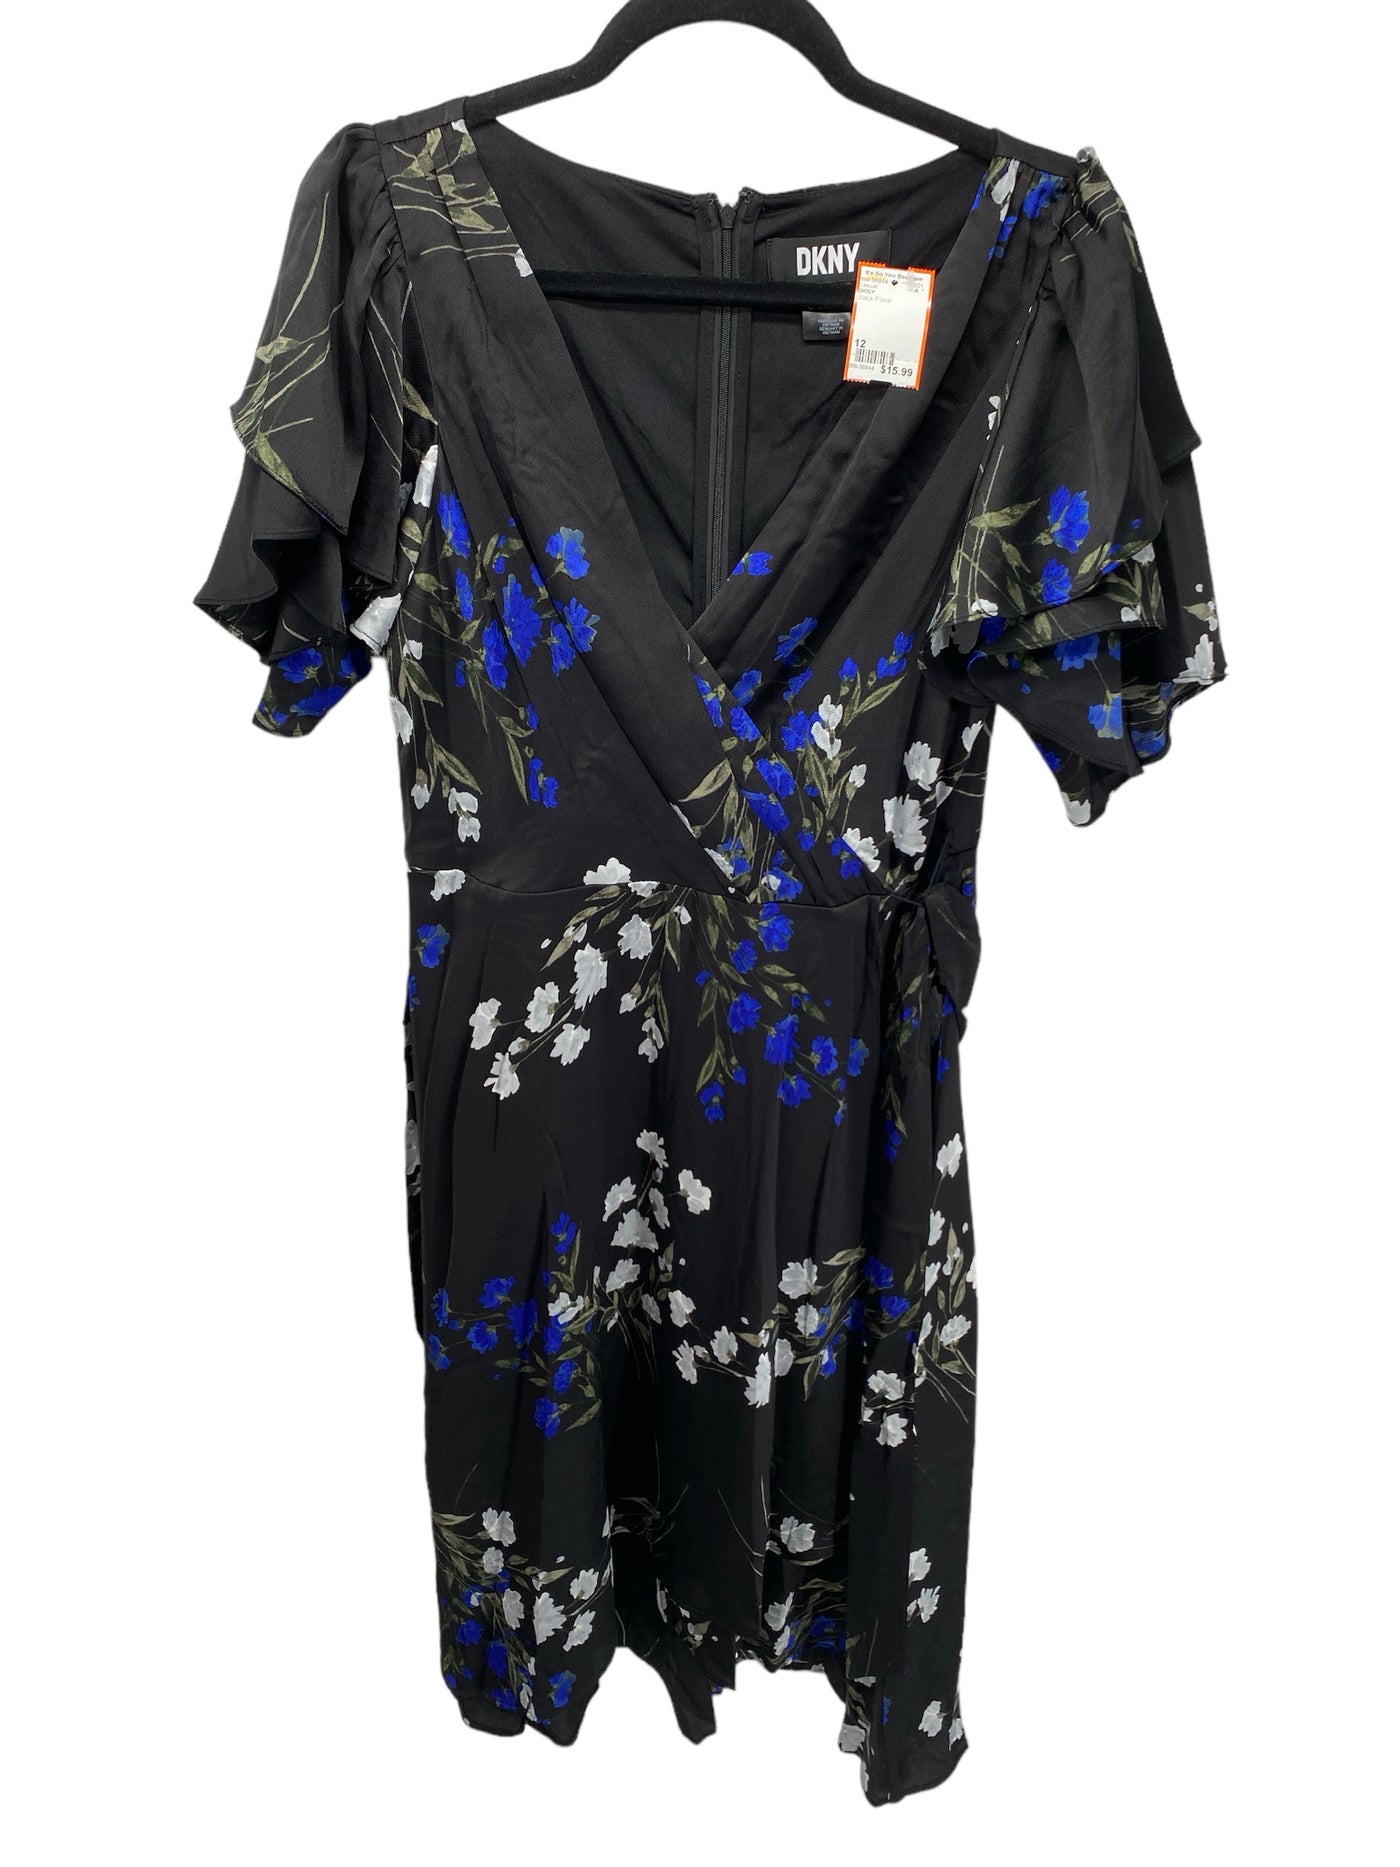 DKNY Misses Size 12 Black Floral Casual